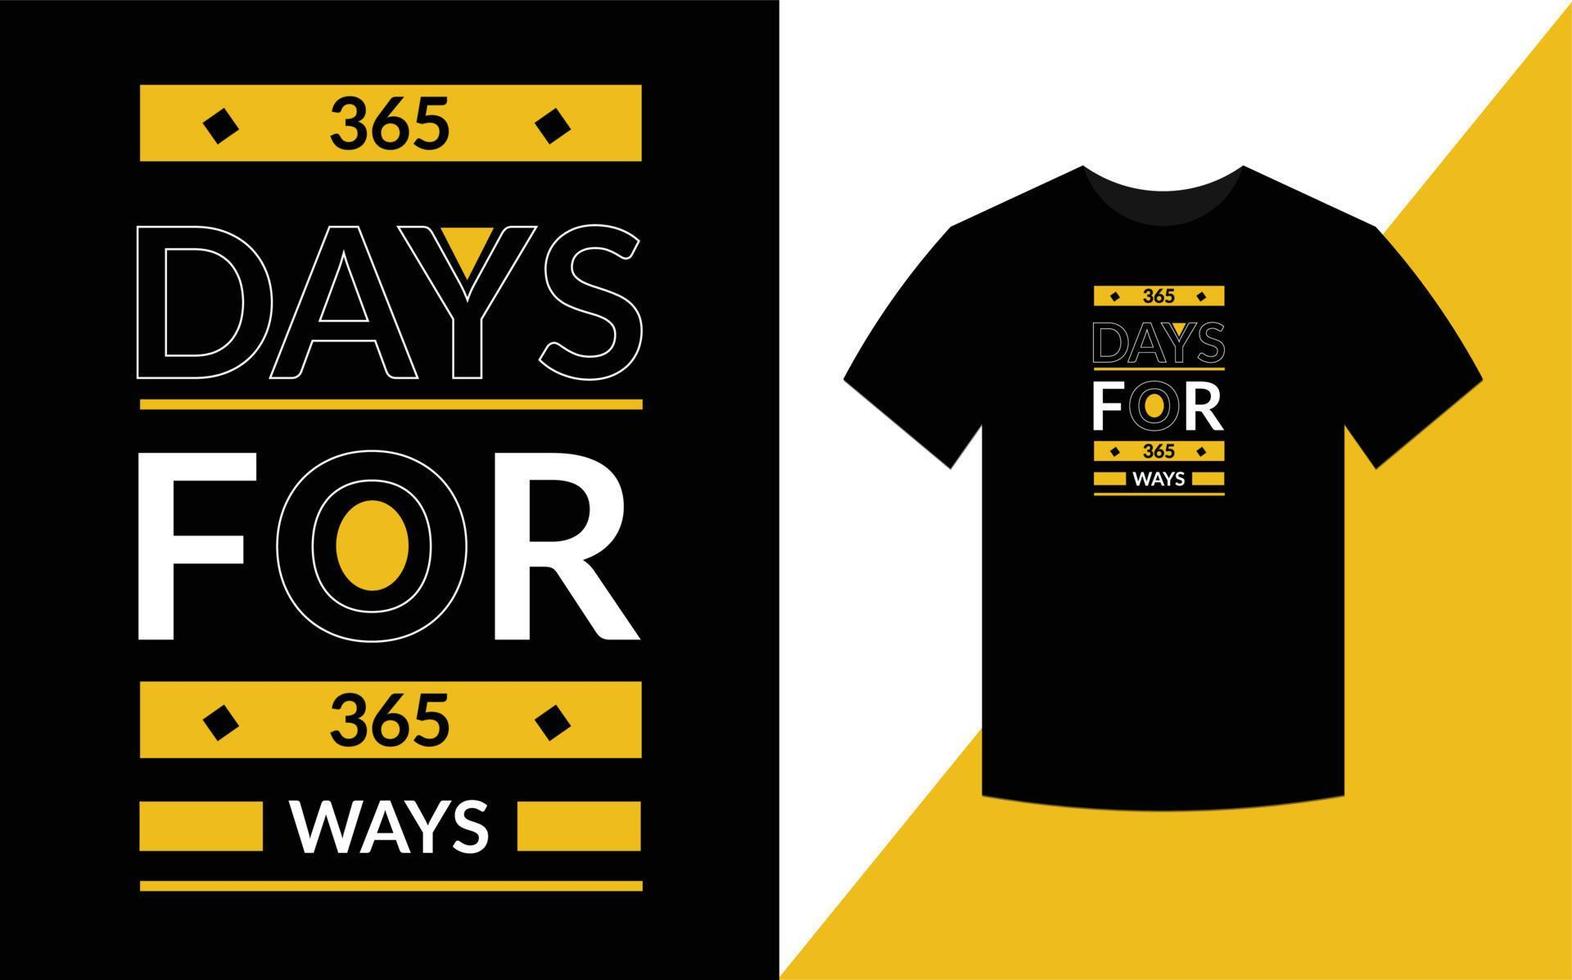 365 days for 365 ways Typography Inspirational Quotes t shirt design for fashion apparel printing. vector